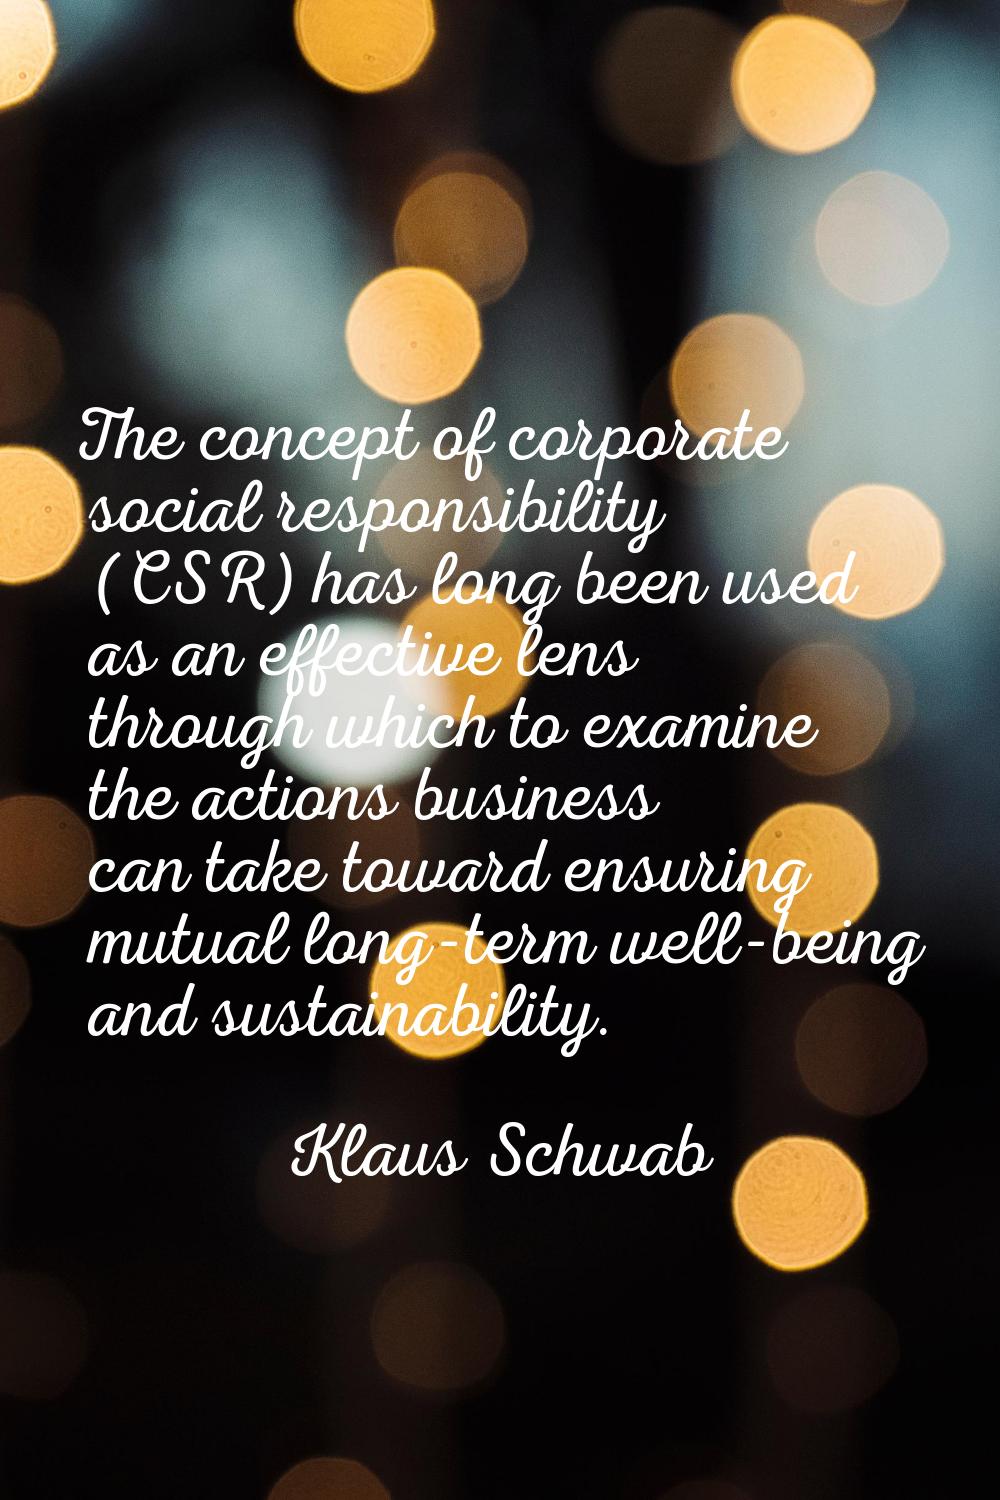 The concept of corporate social responsibility (CSR) has long been used as an effective lens throug